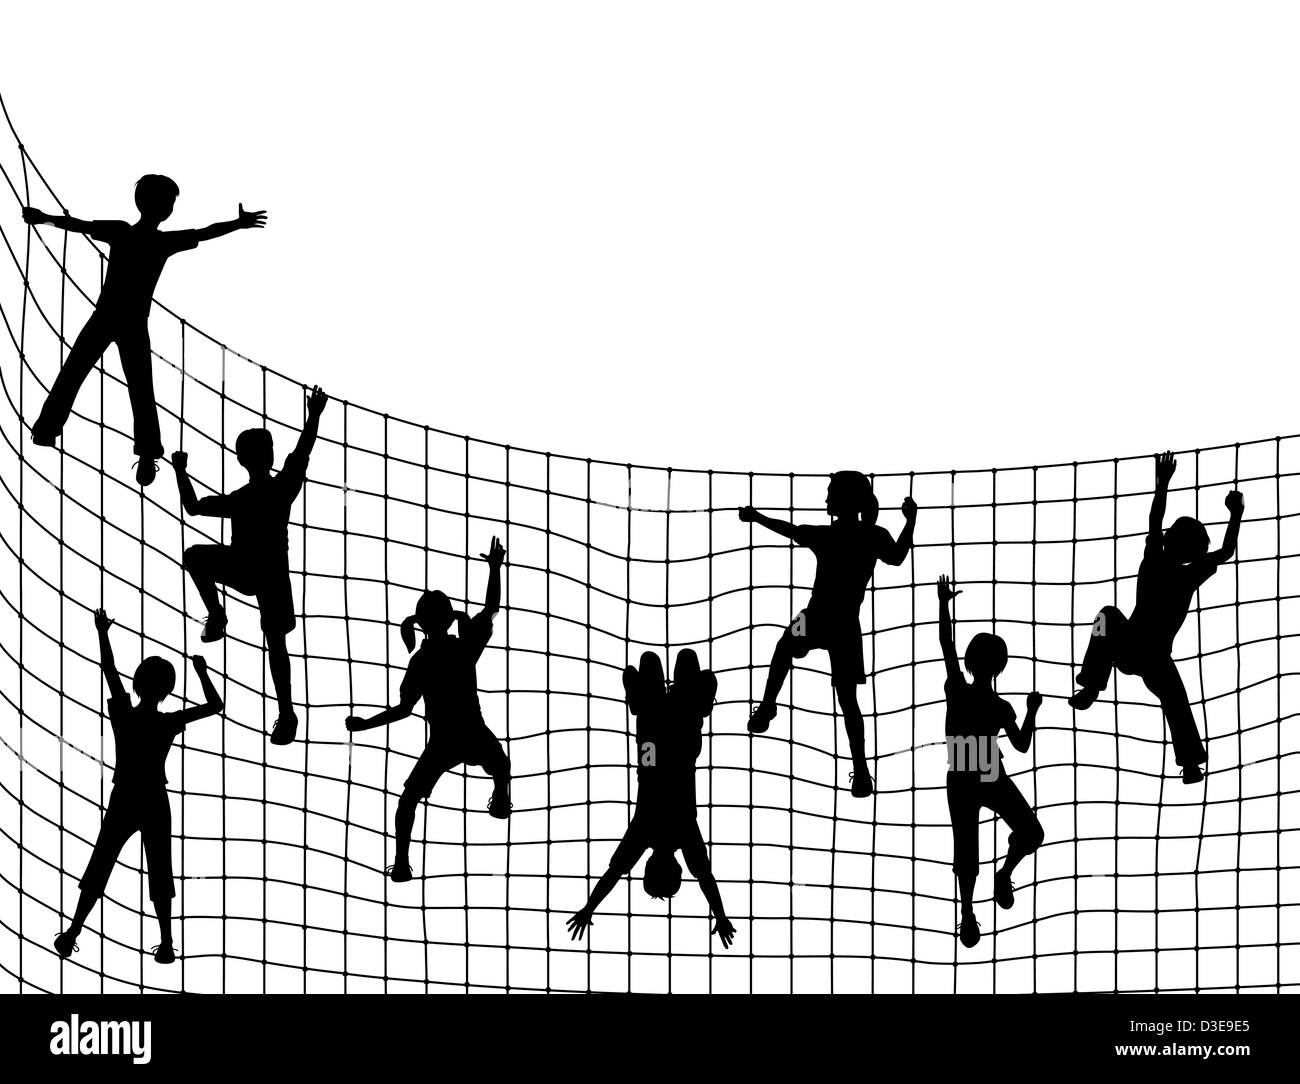 Illustration of children silhouettes climbing a net Stock Photo